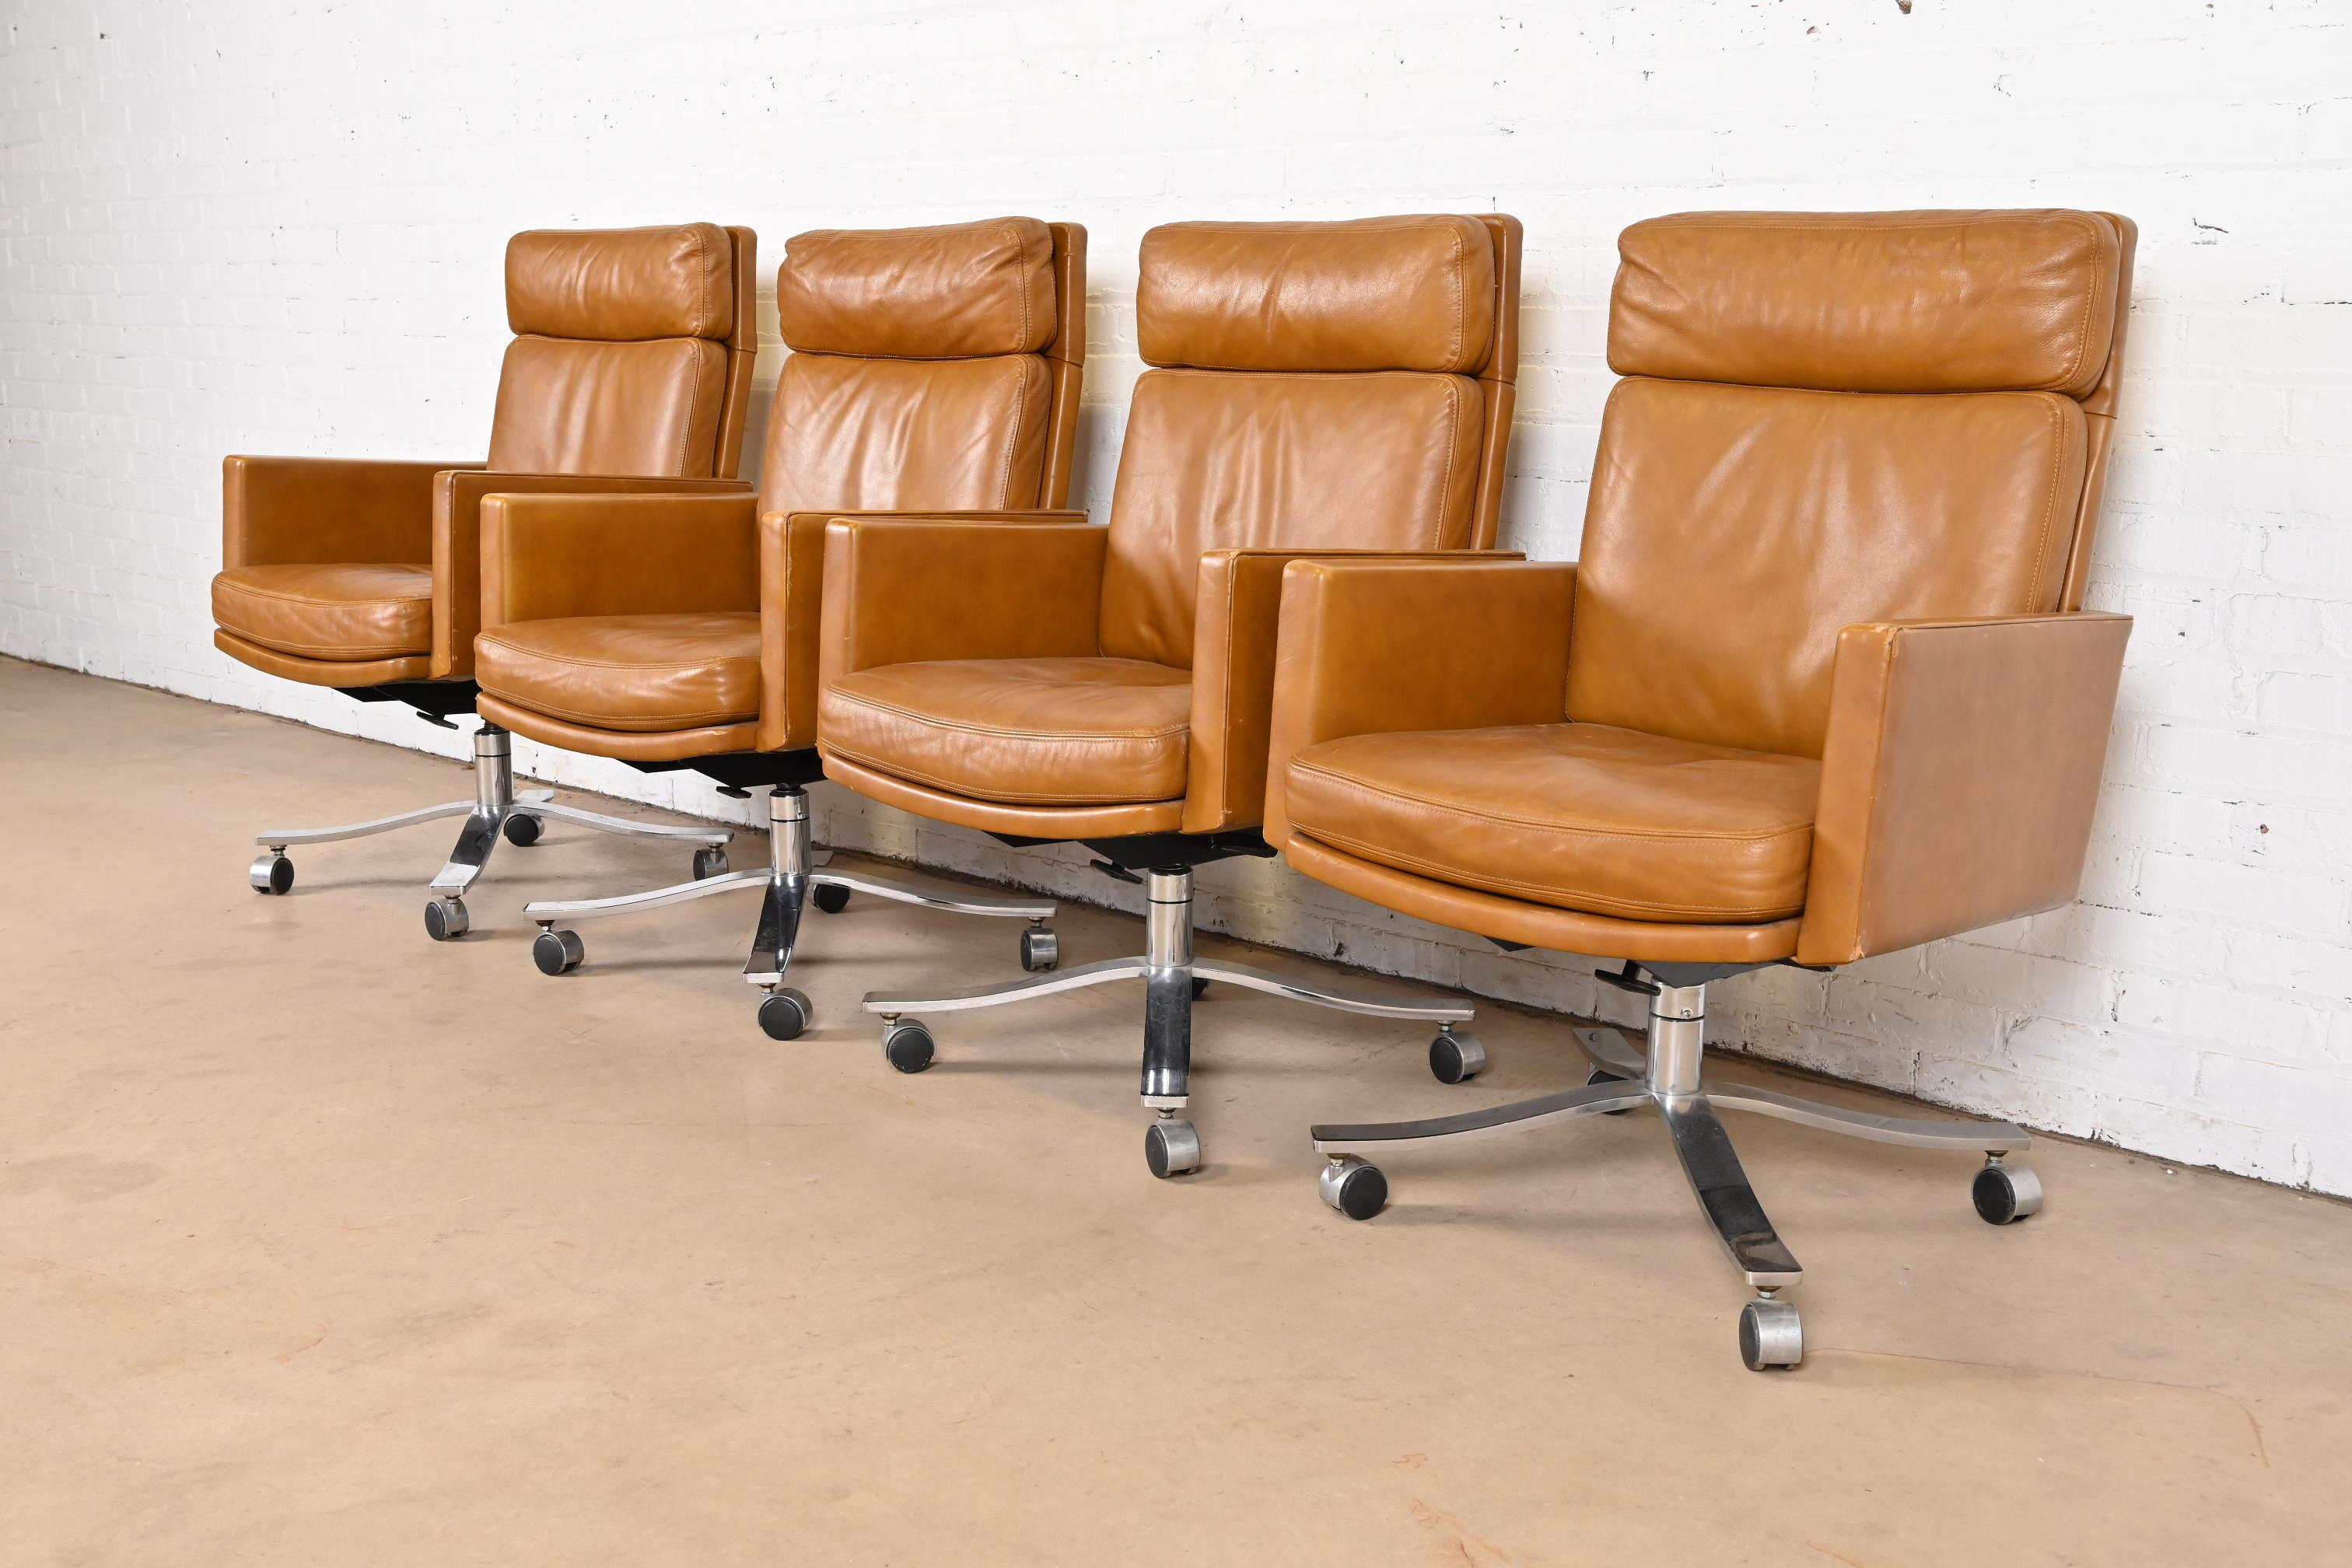 American Stow Davis Mid-Century Modern Leather Executive Swivel Desk Chairs, Set of Four For Sale